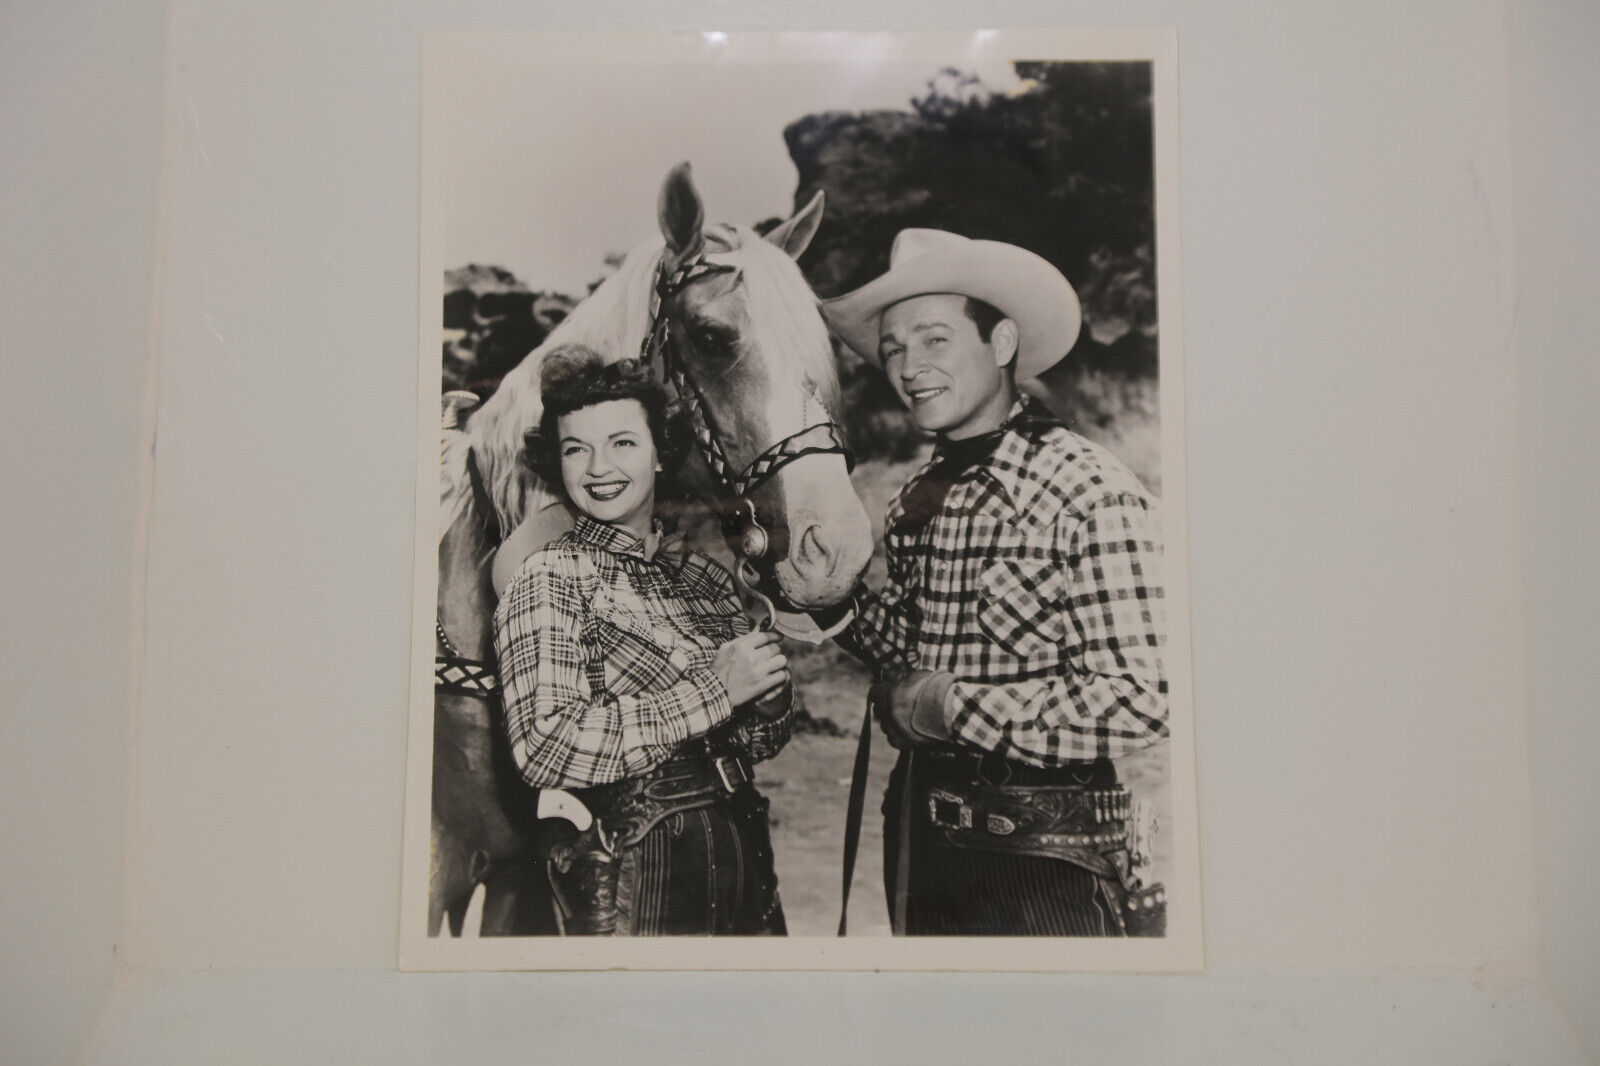 Roy Rogers Dale Evans & Trigger - 8X10 PUBLICITY PHOTO black/white Glossy